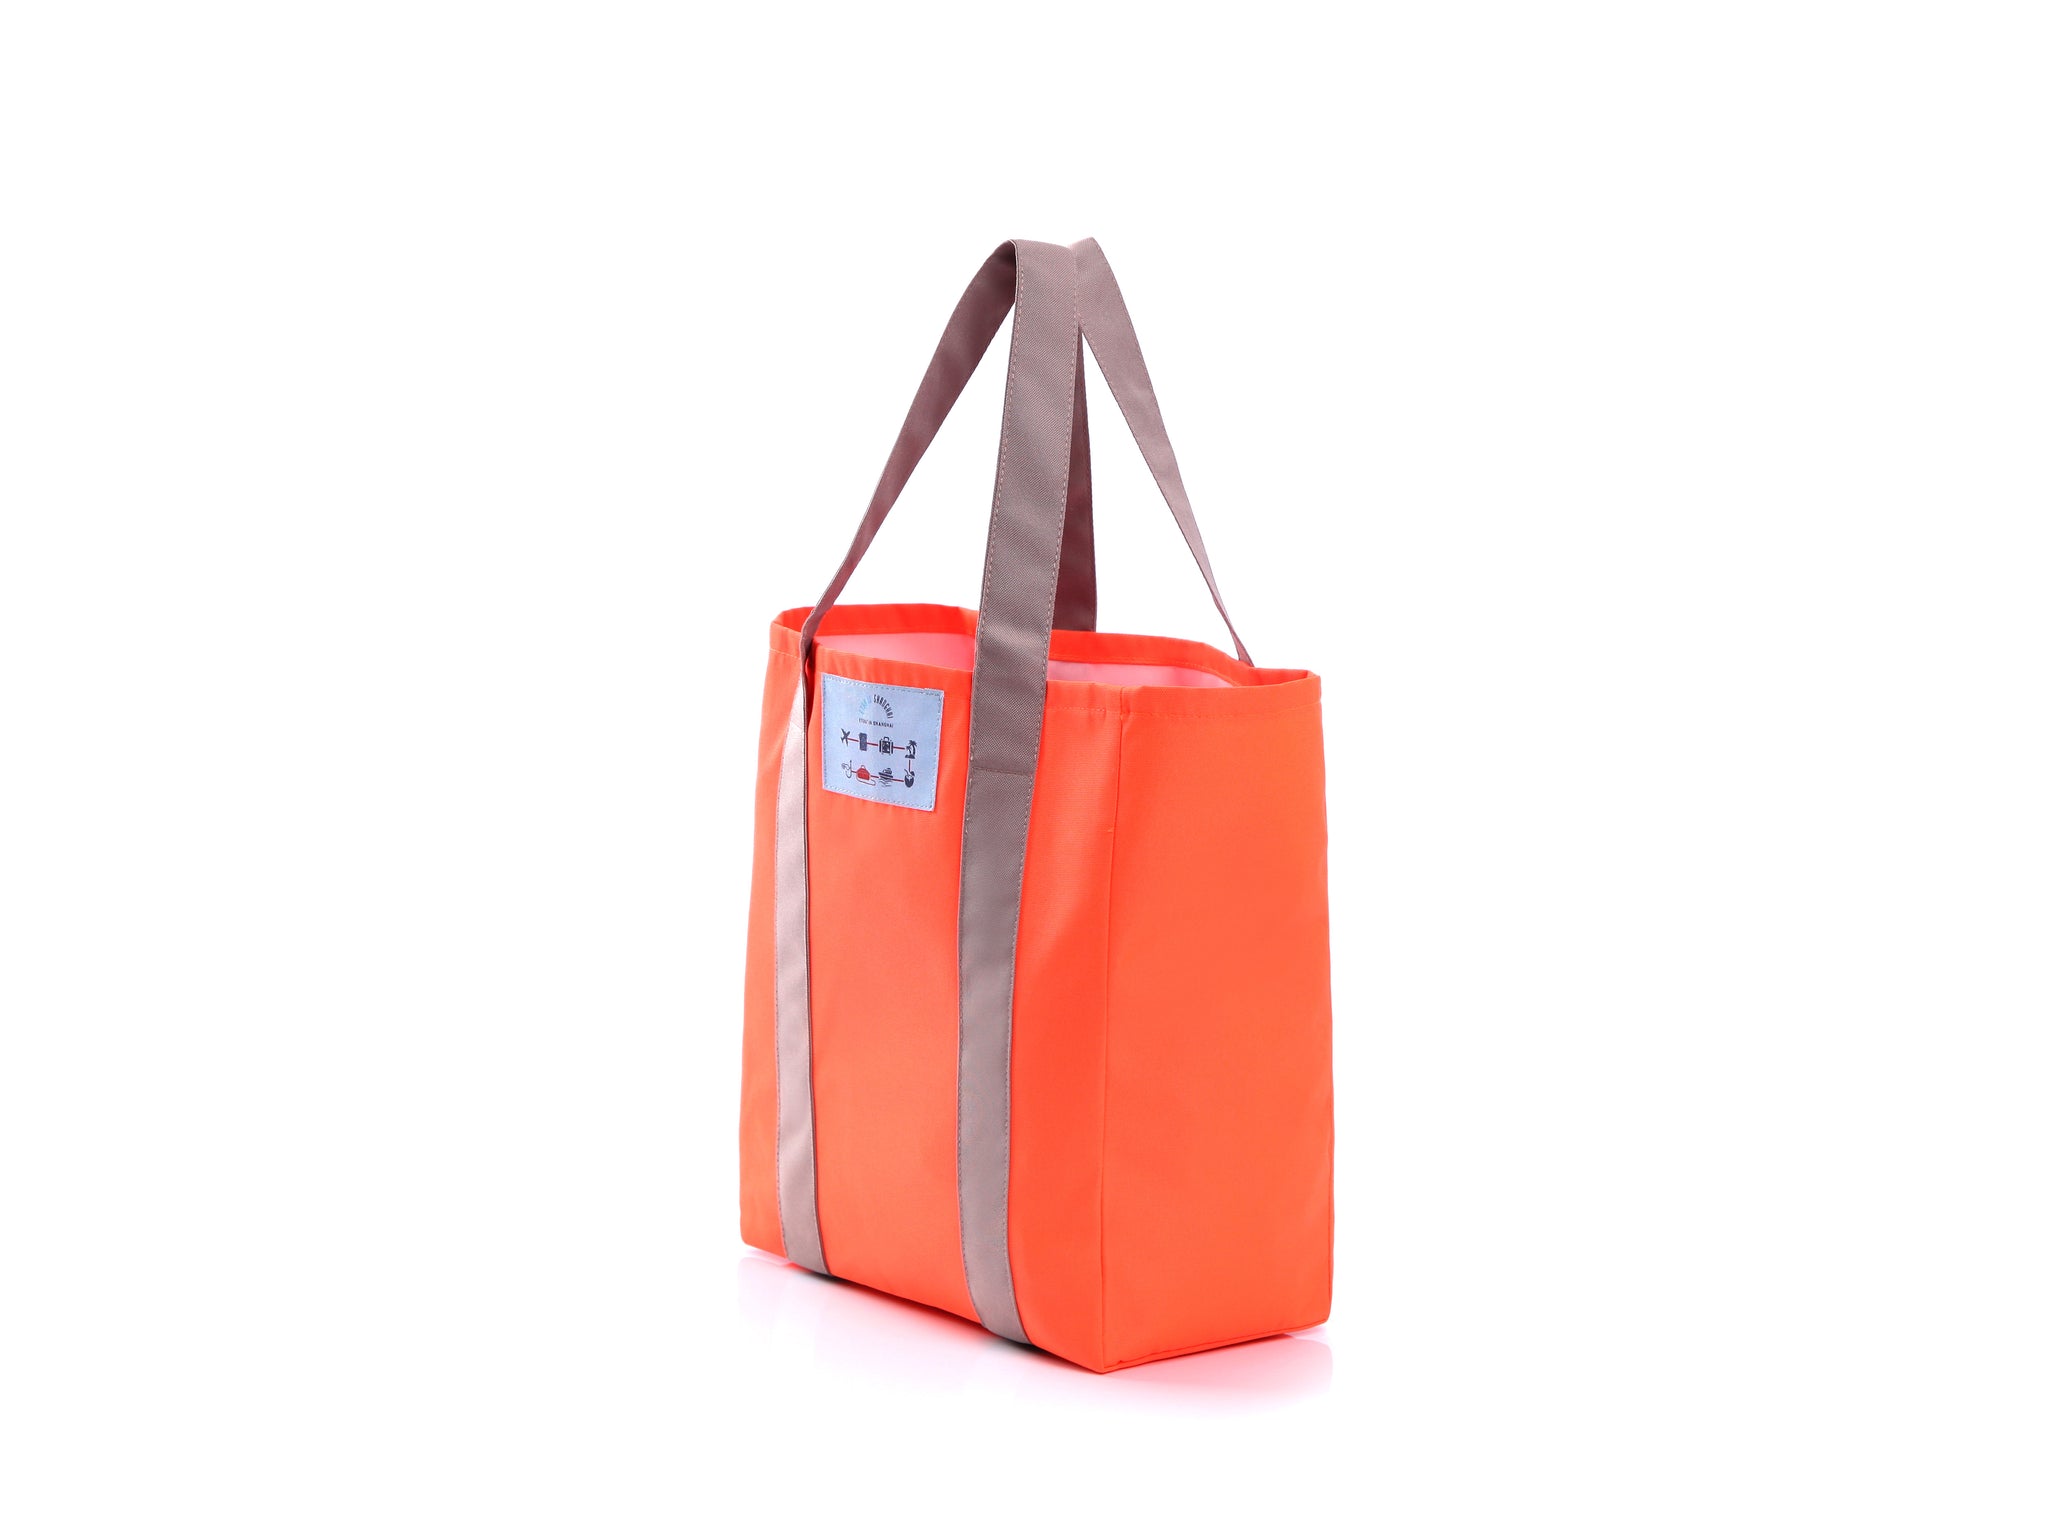 Neon Recycled Large Tote Bag | Large Shopping Bag